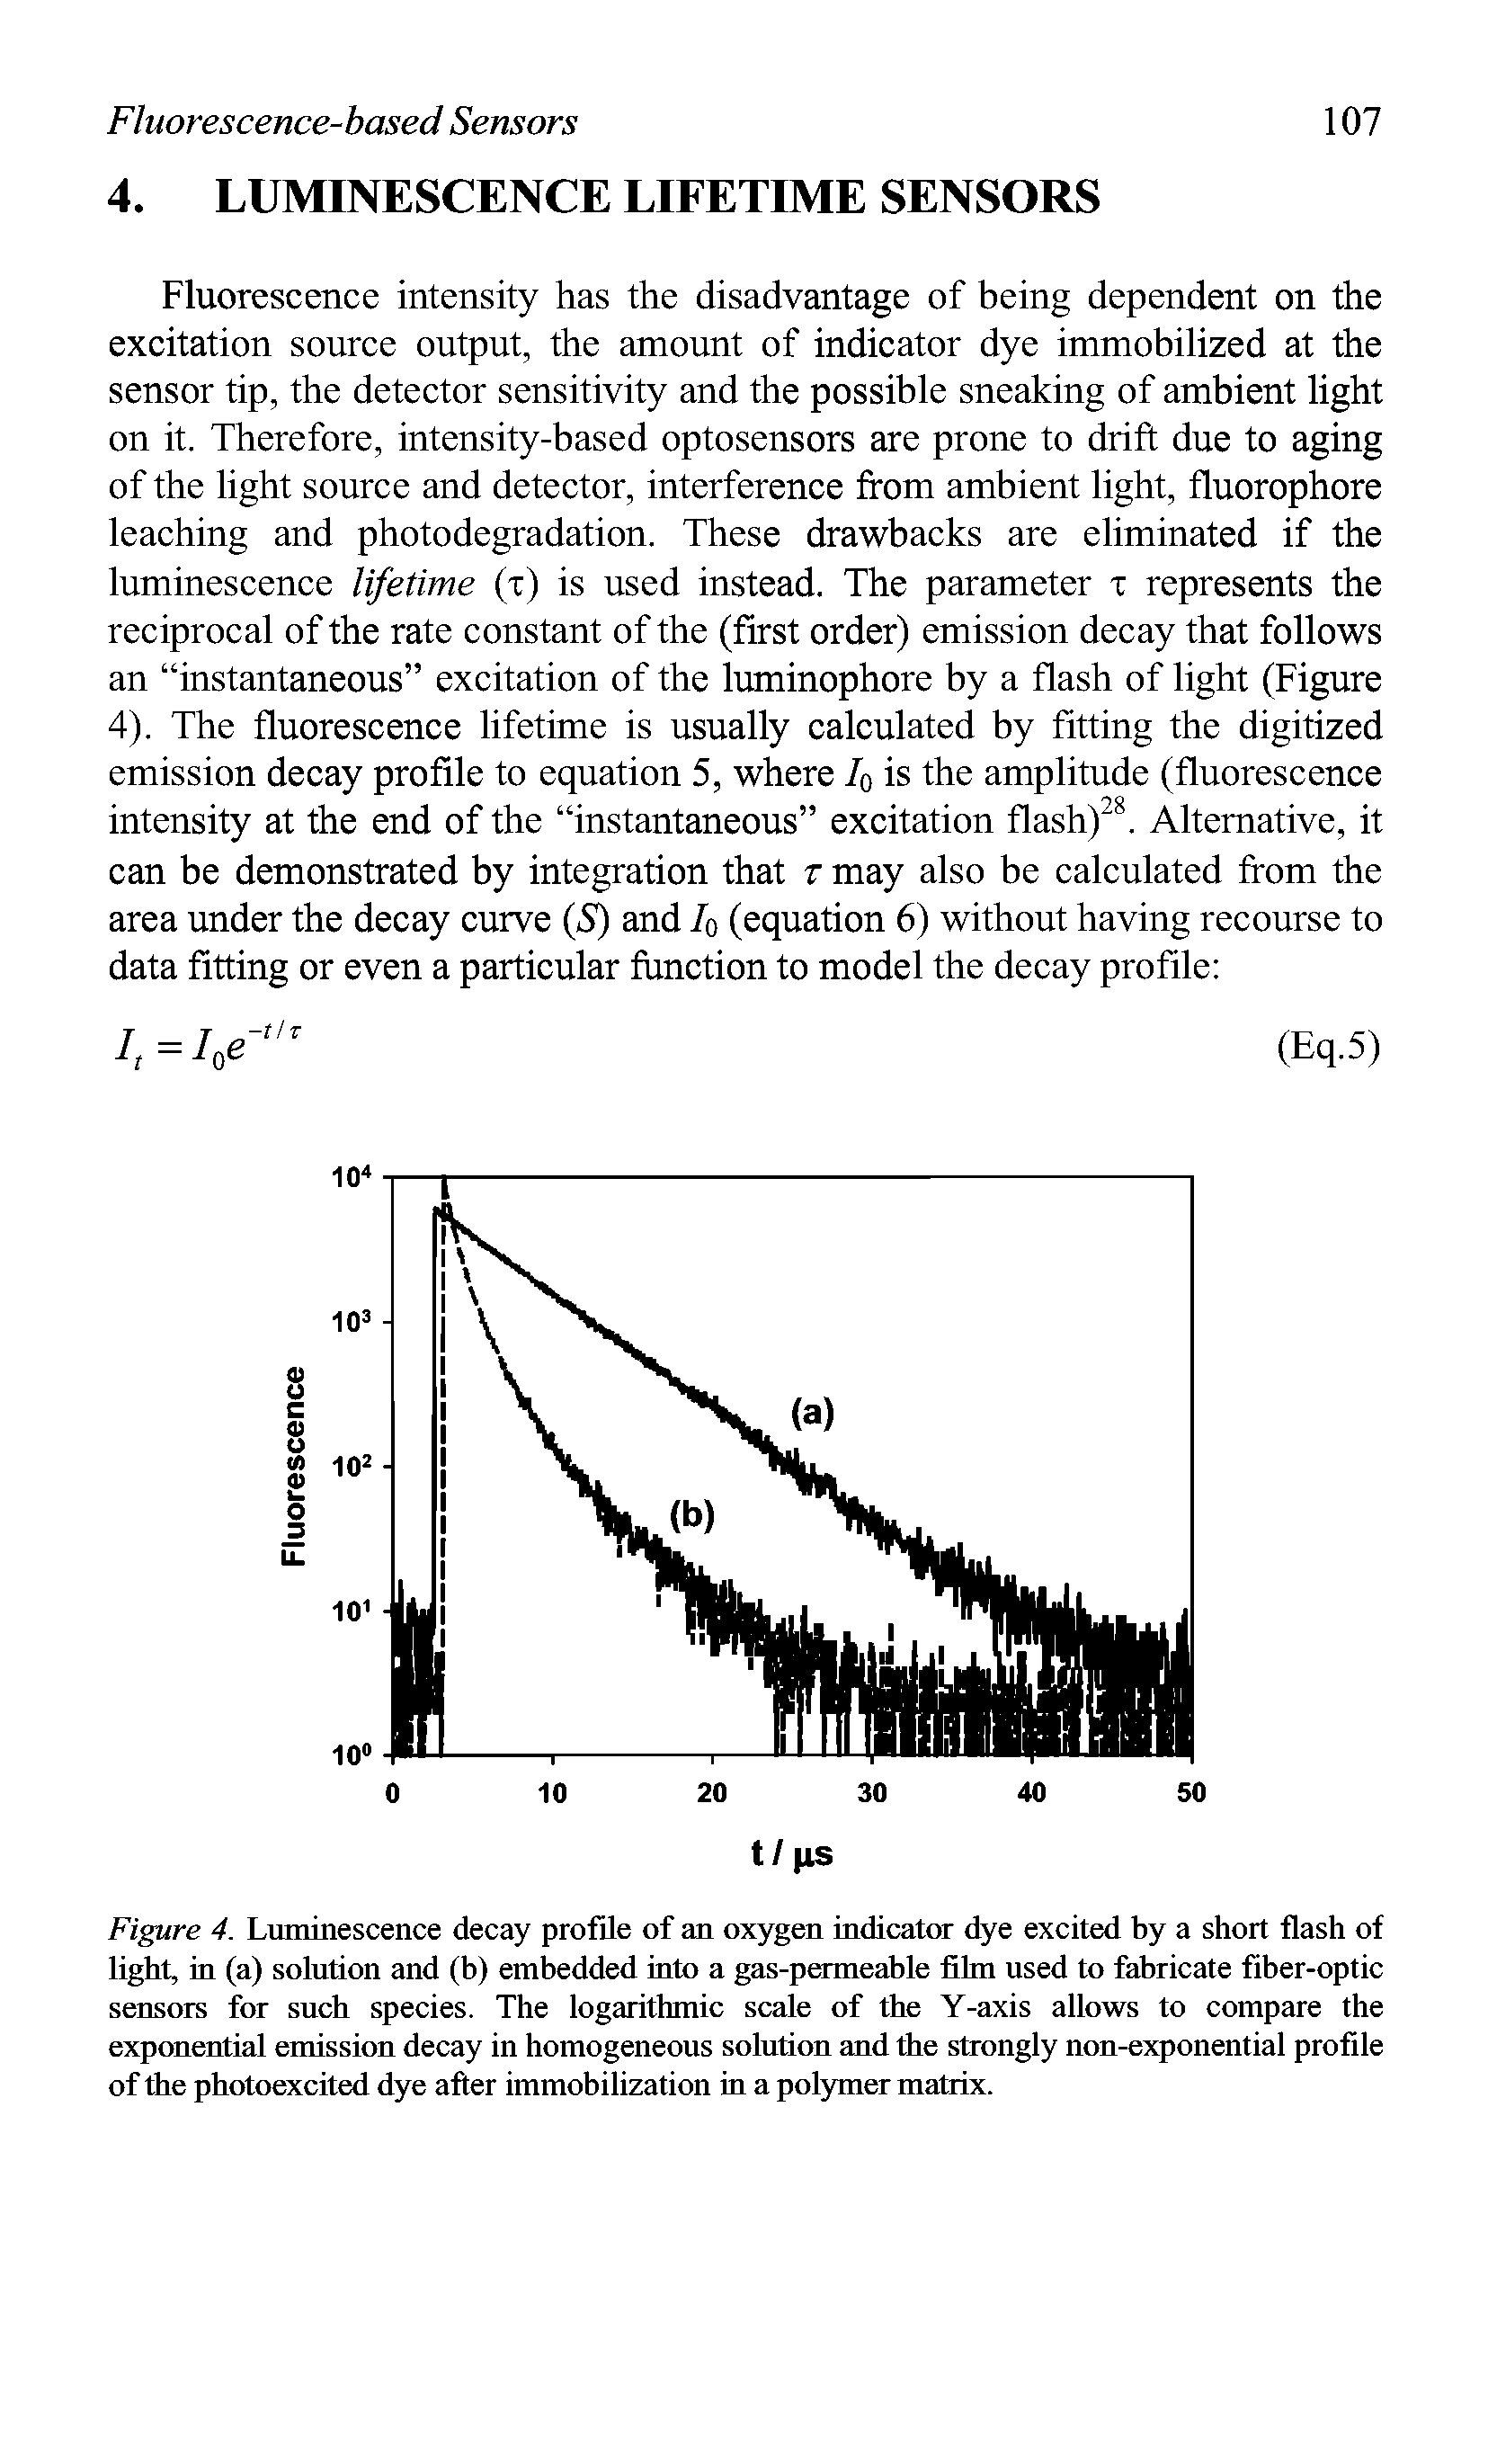 Figure 4. Luminescence decay profile of an oxygen indicator dye excited by a short flash of light, in (a) solution and (b) embedded into a gas-permeable film used to fabricate fiber-optic sensors for such species. The logarithmic scale of the Y-axis allows to compare the exponential emission decay in homogeneous solution and the strongly non-exponential profile of the photoexcited dye after immobilization in a polymer matrix.